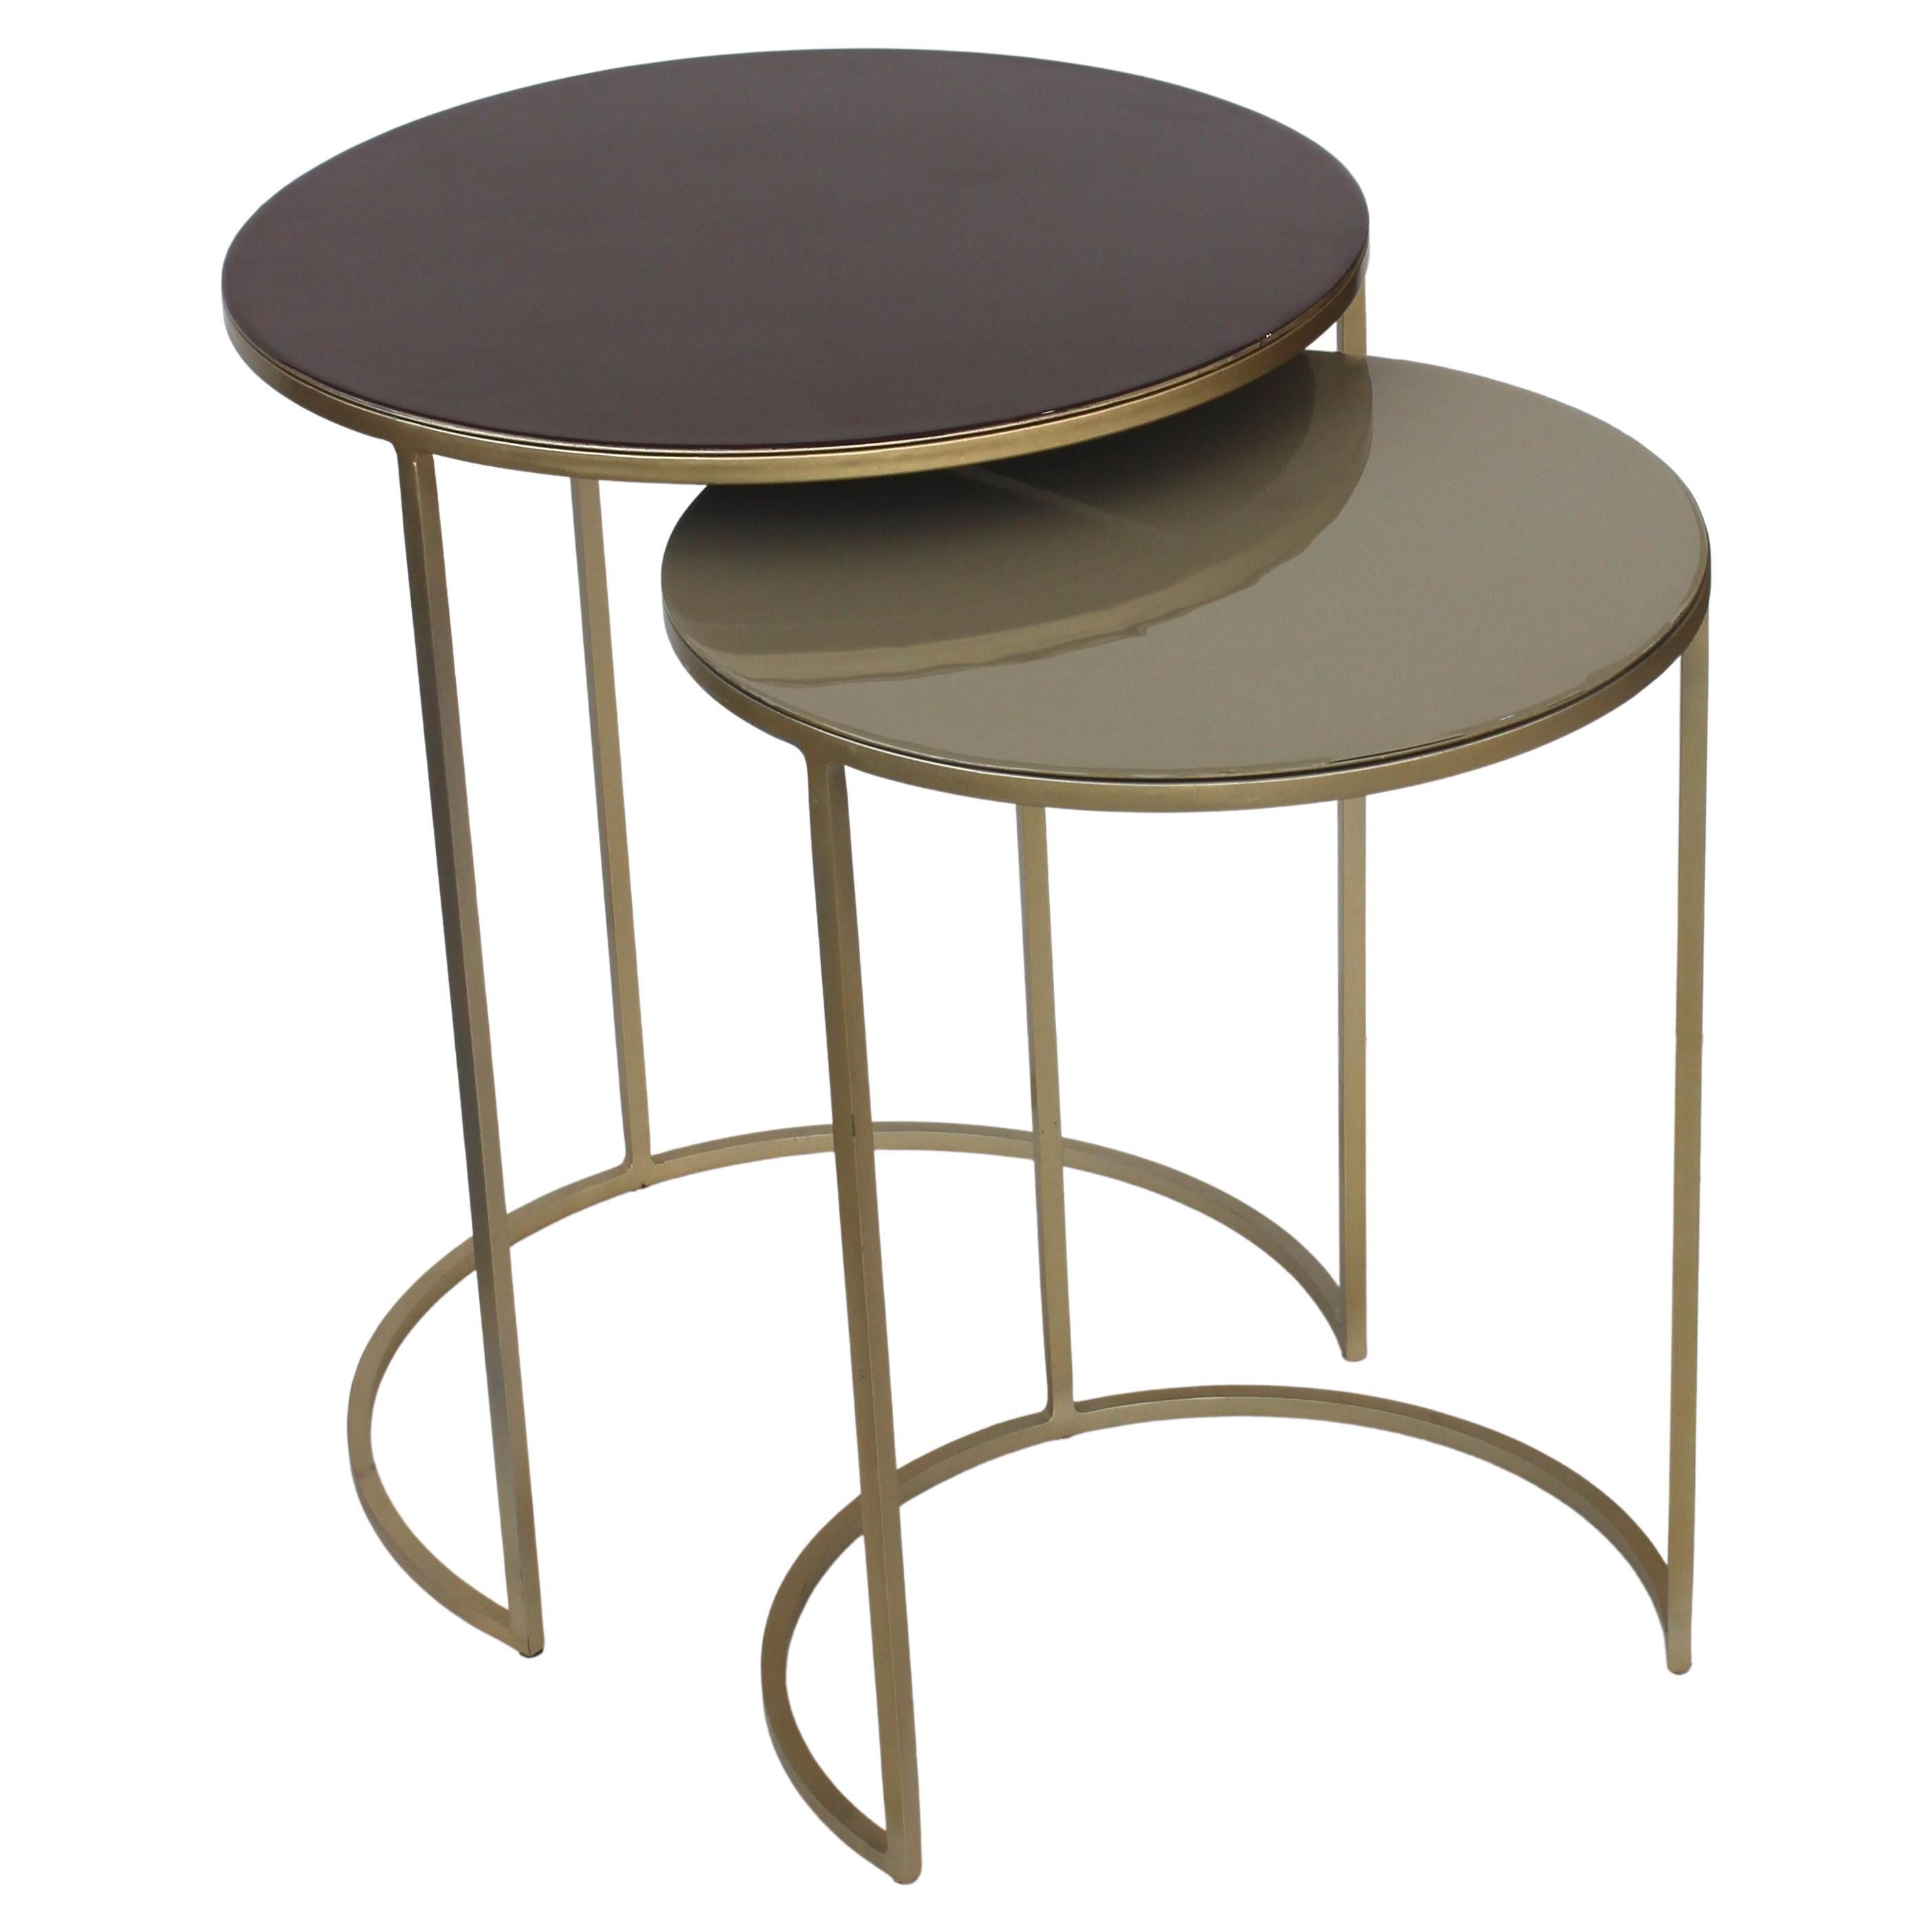 Two Piece Nesting Tables with Lacquered Tops